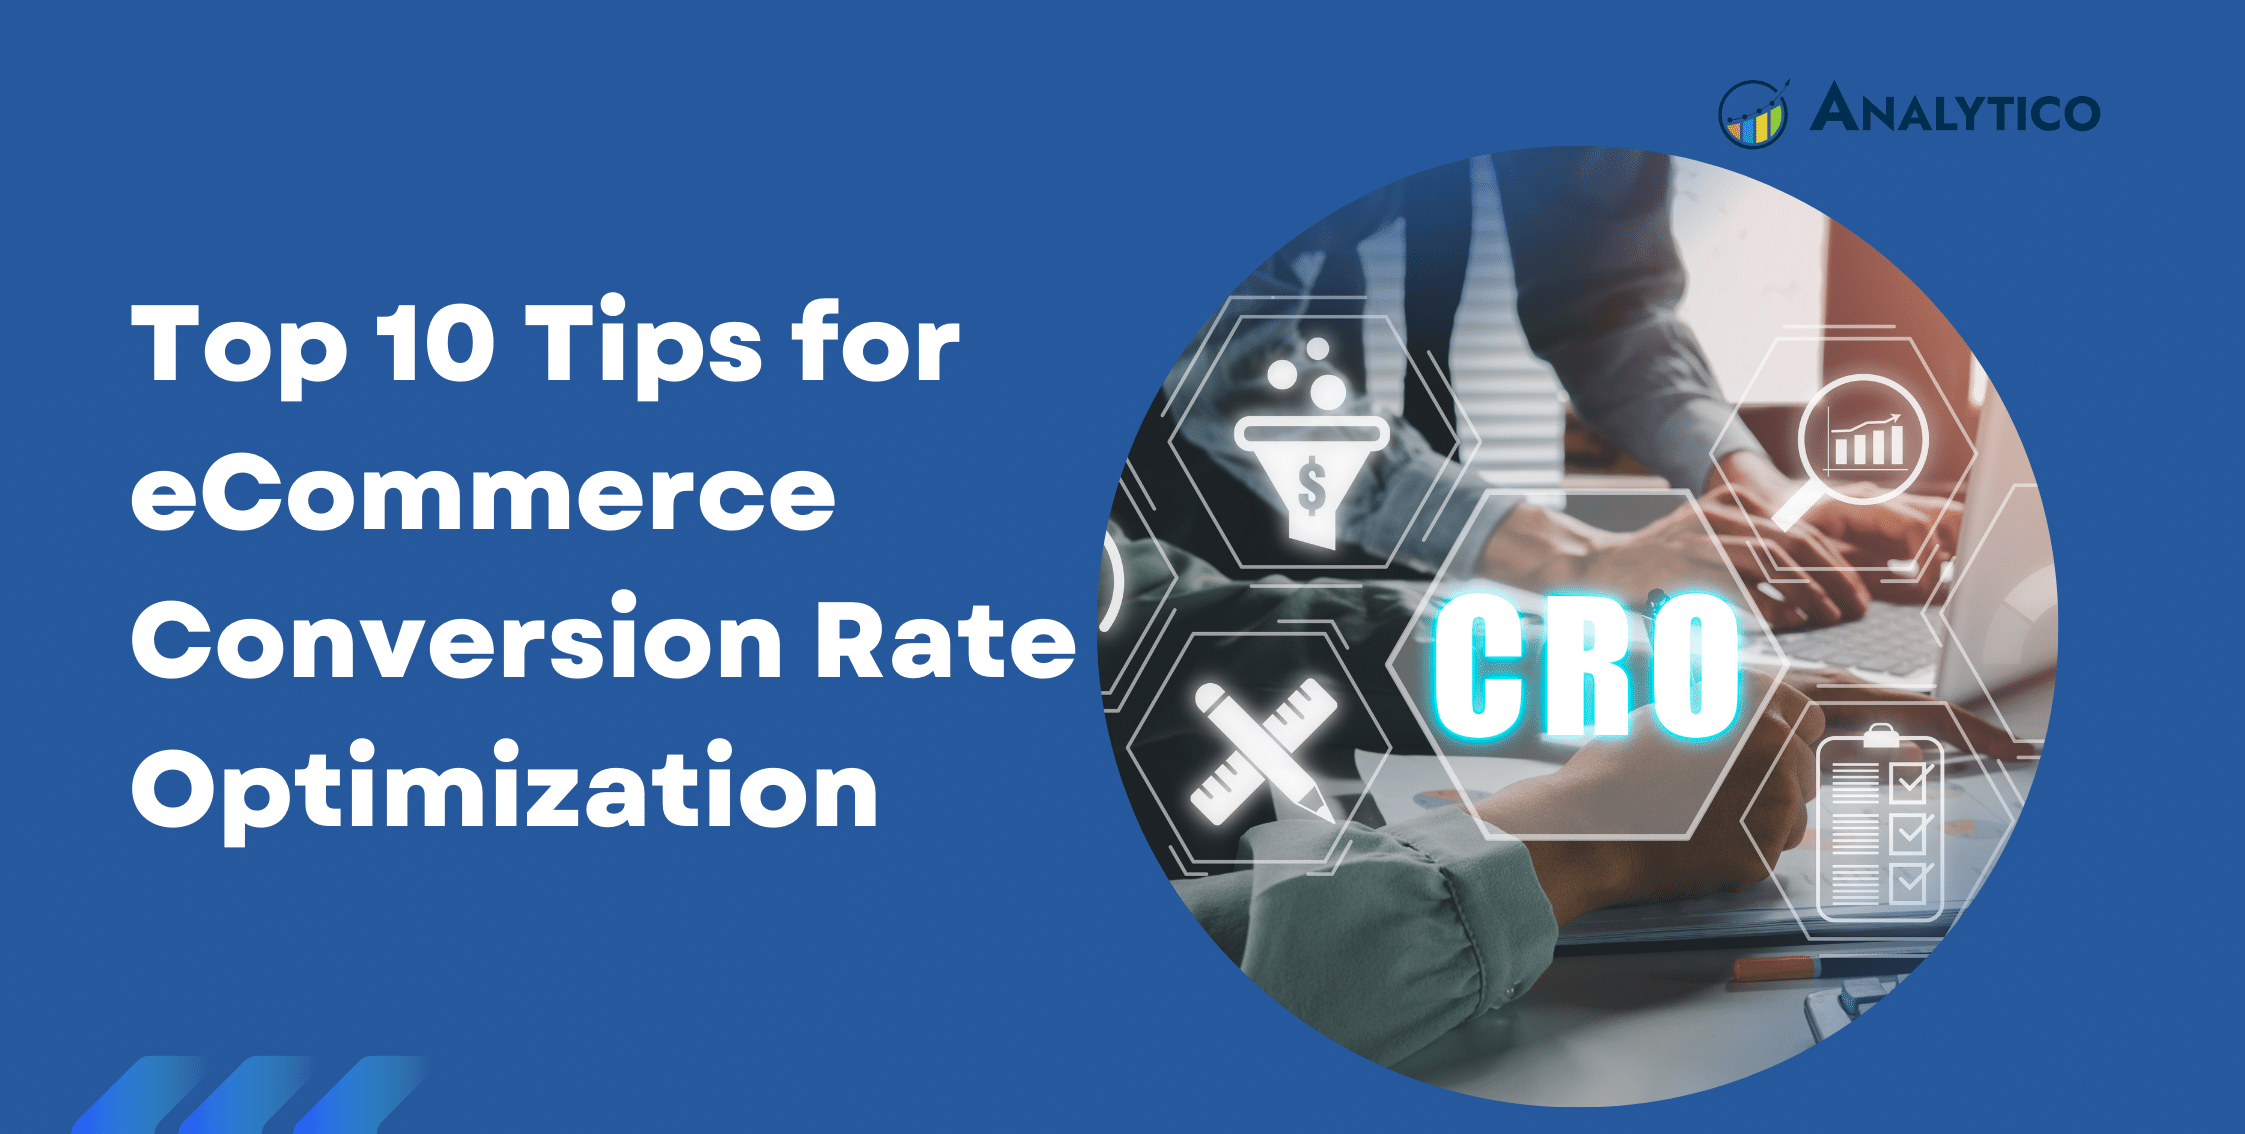 Top 10 Tips for eCommerce Conversion Rate Optimization